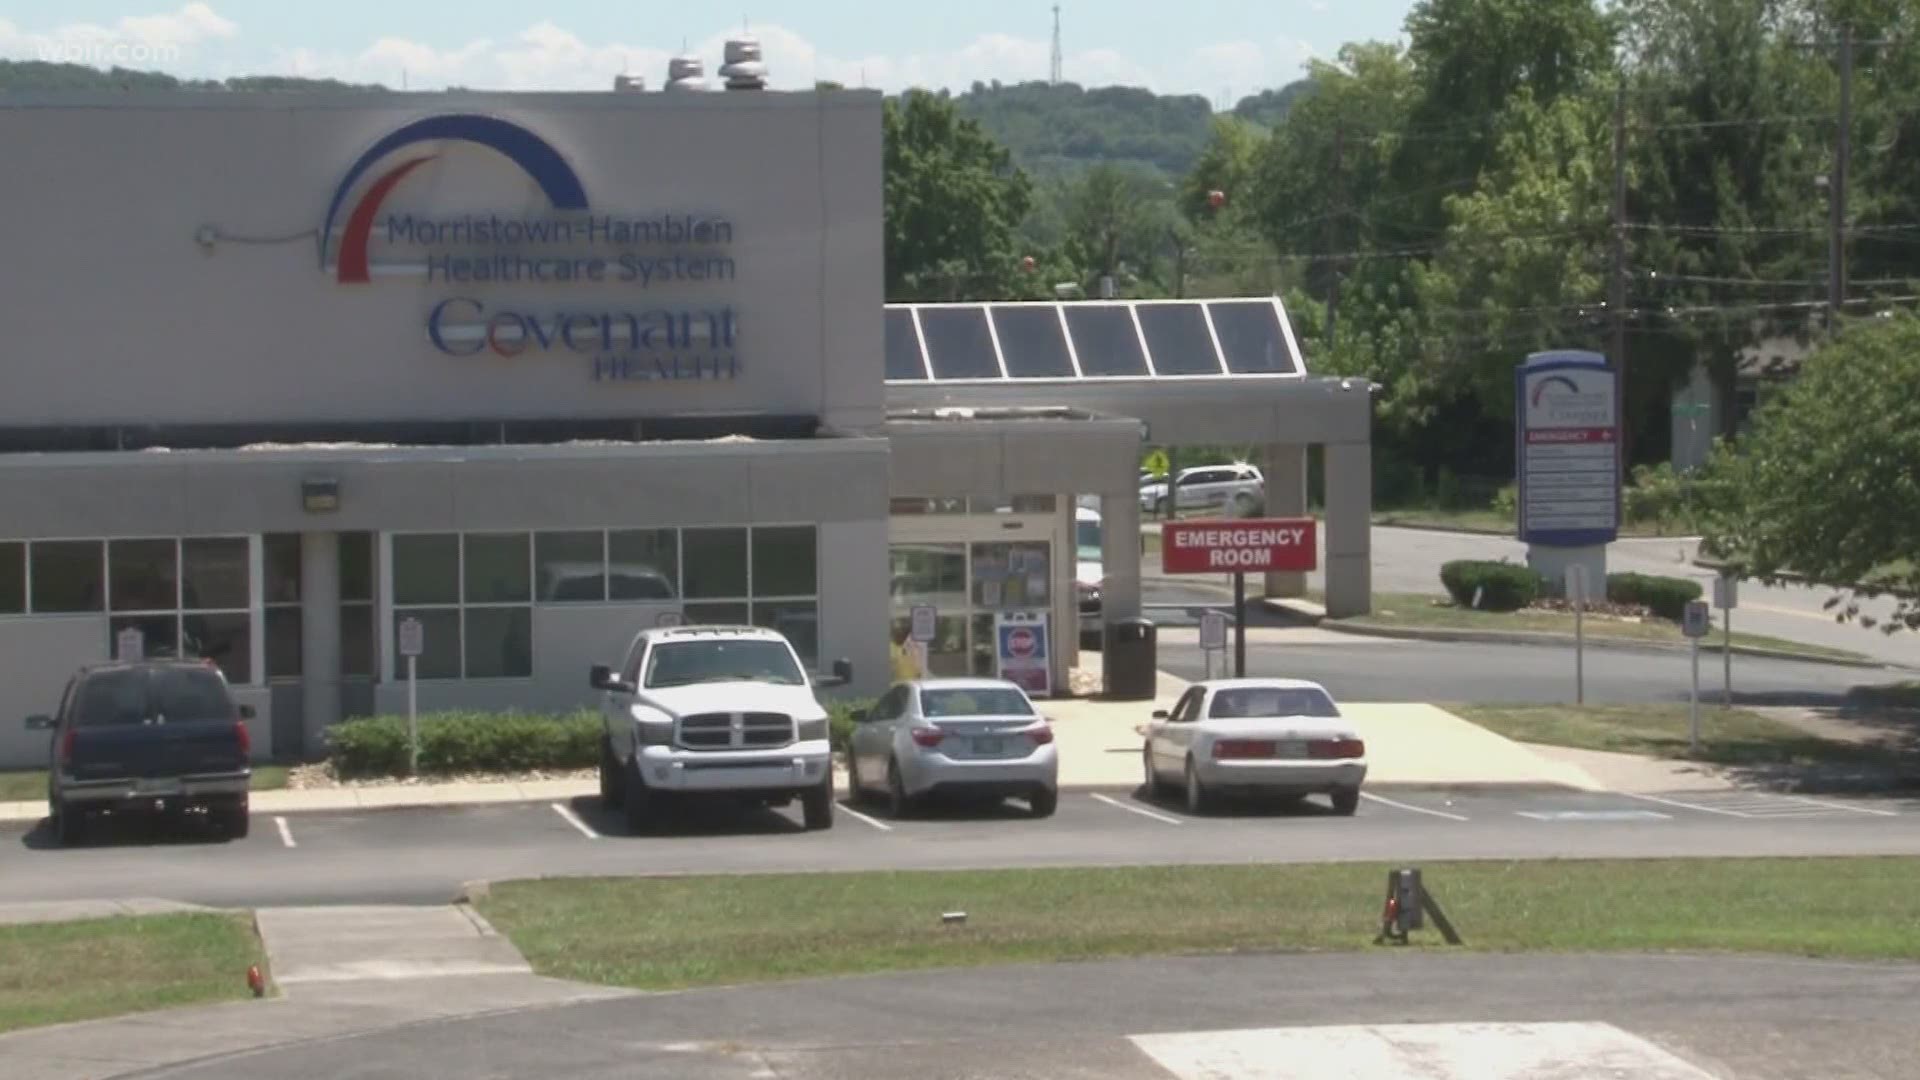 A Morristown hospital is seeing a spike in virus patients. They're taking steps to respond.